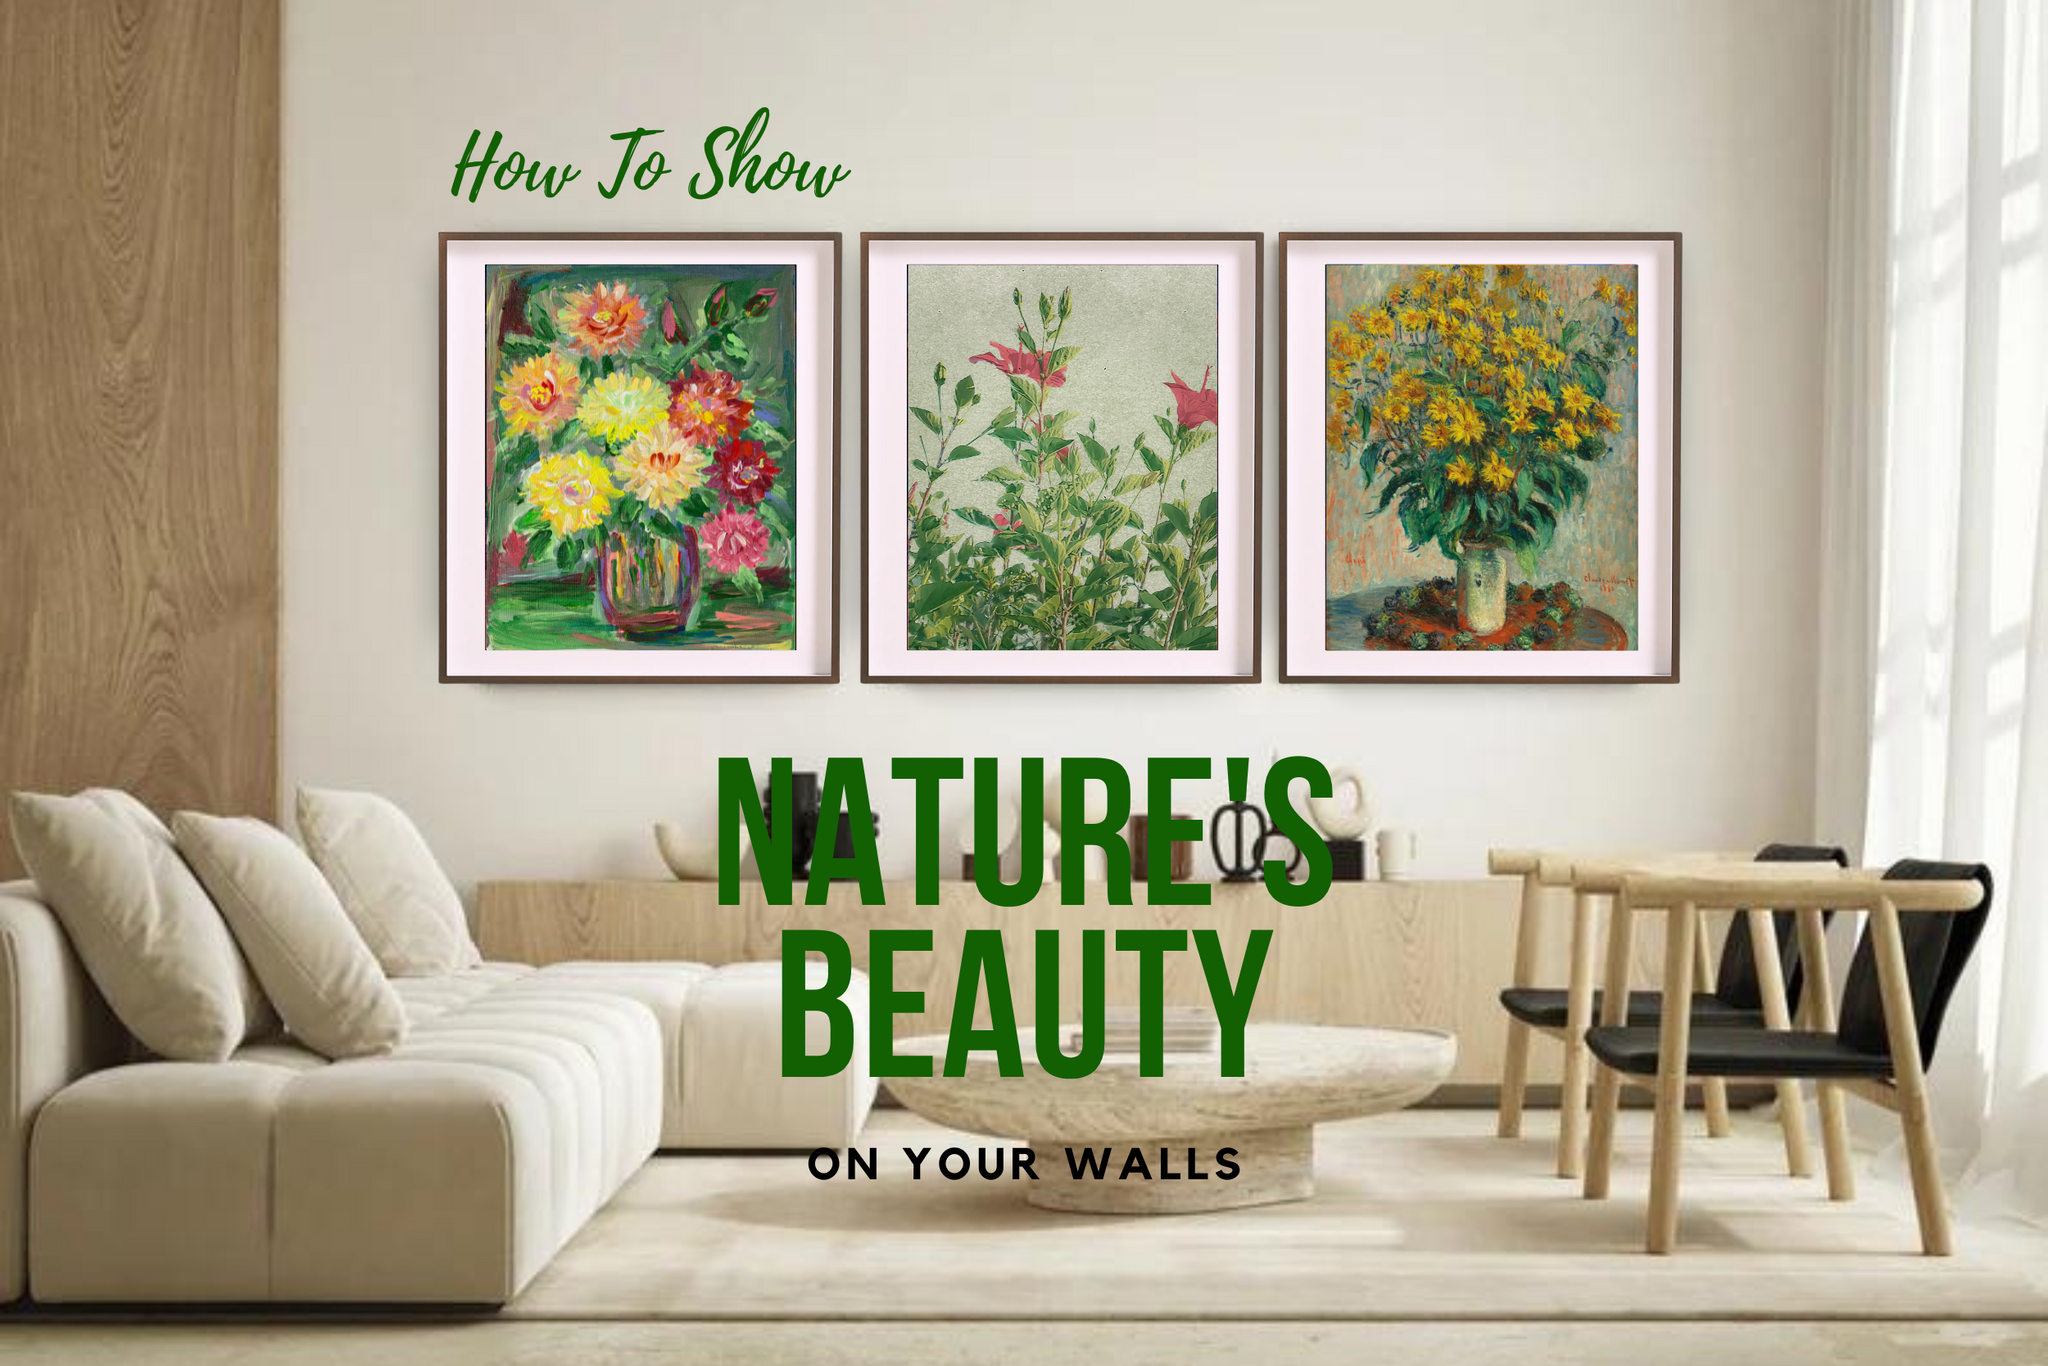 How To Show Nature’s Beauty On Your Walls - Floral Paintings Bloom Year-Round